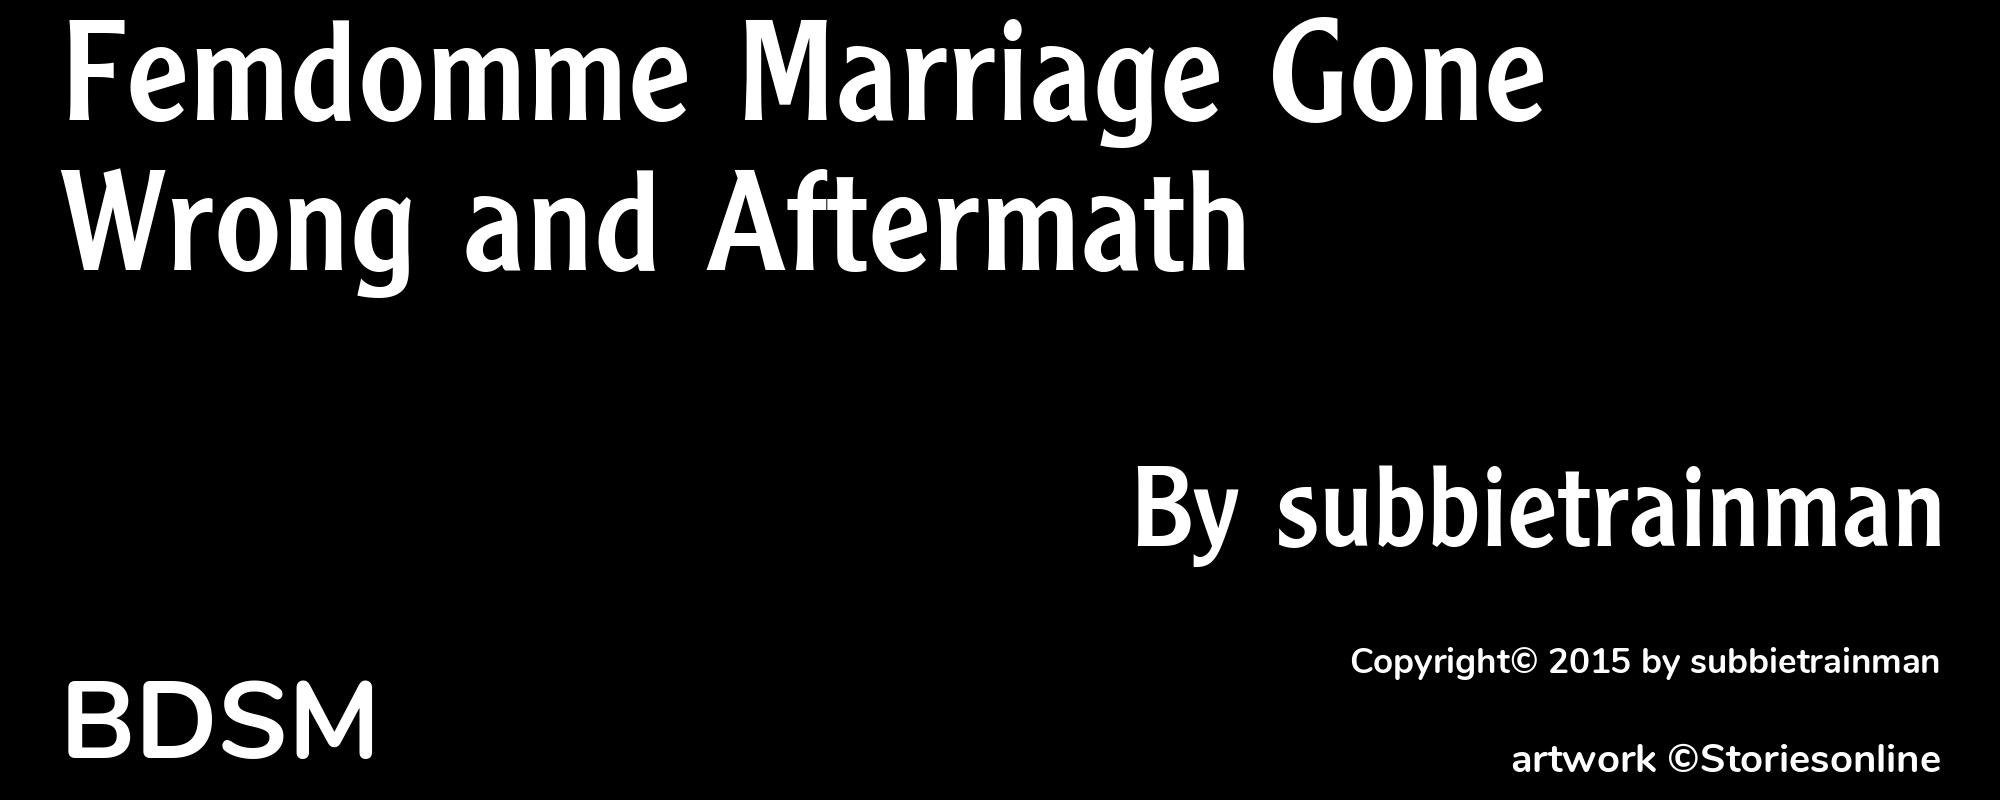 Femdomme Marriage Gone Wrong and Aftermath - Cover